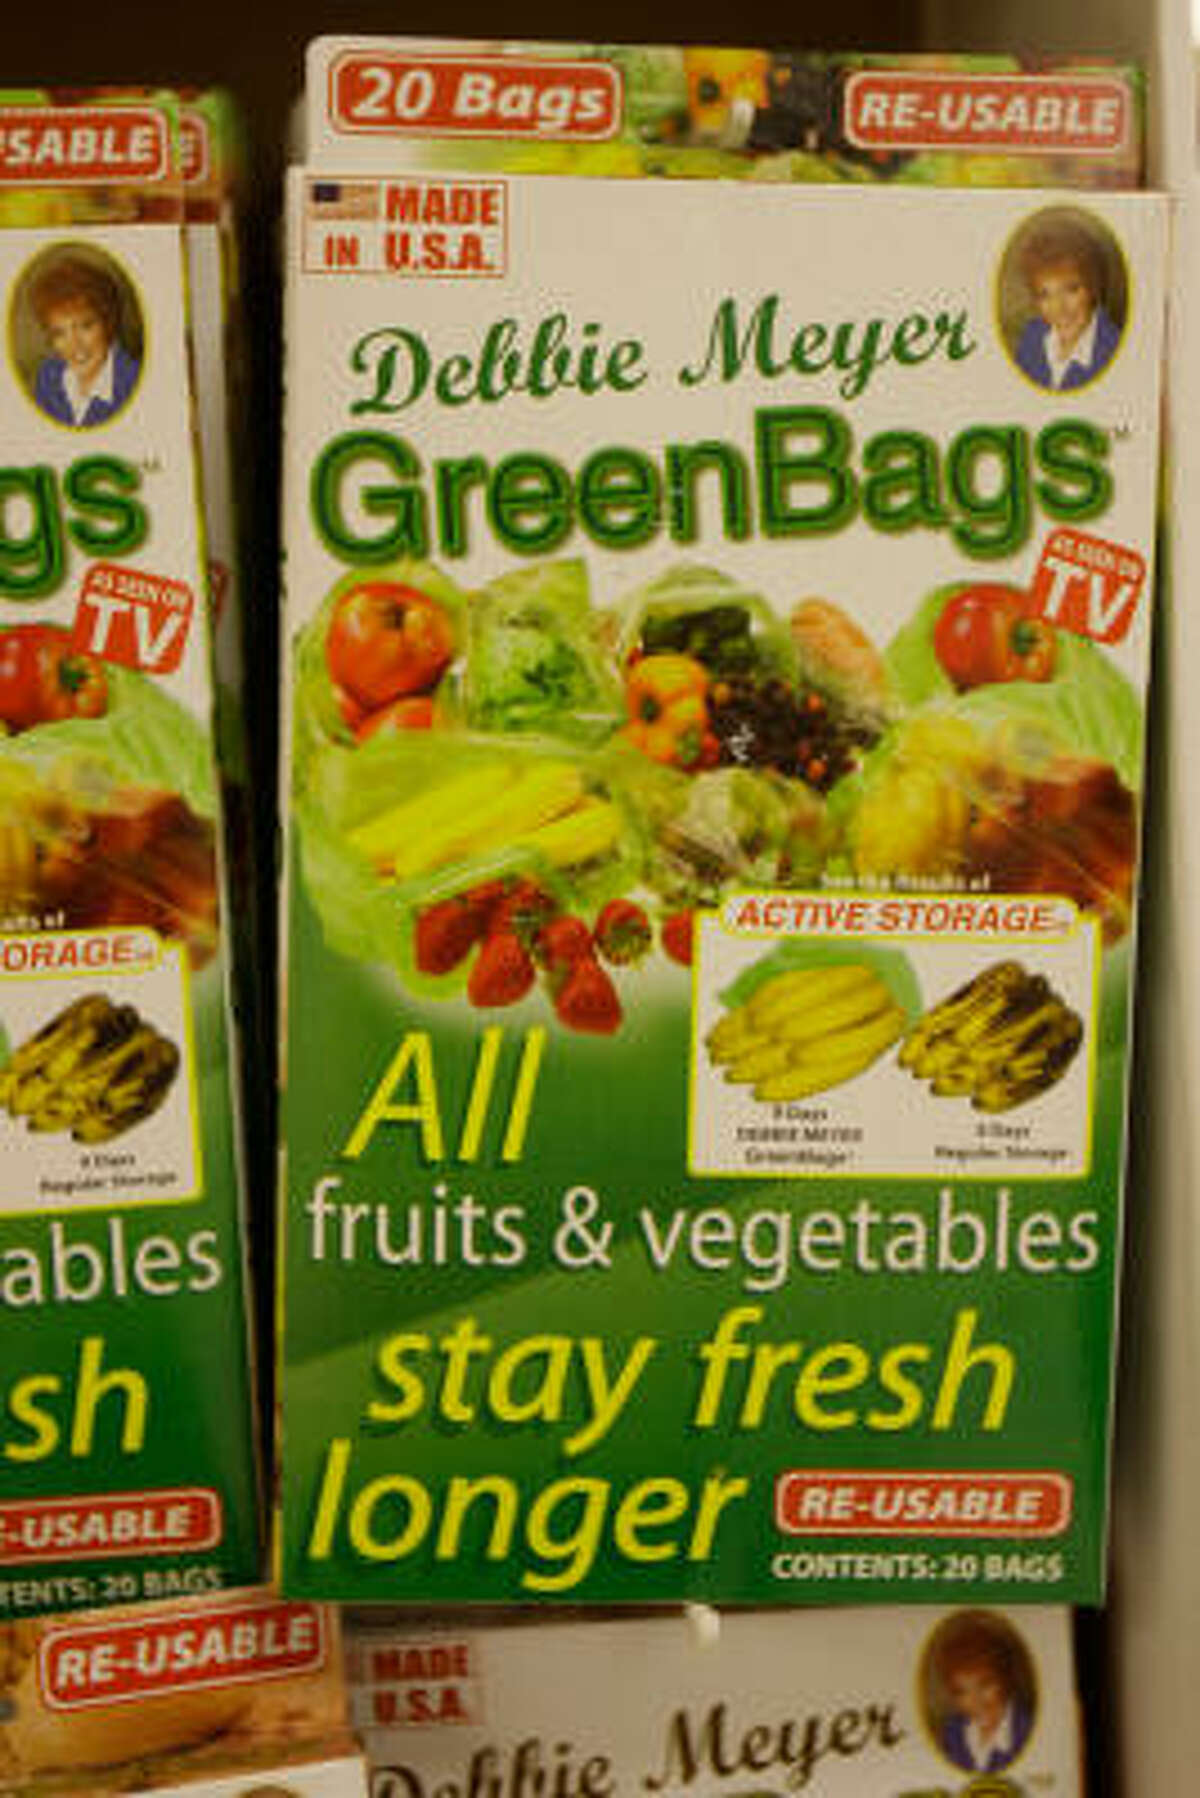 Green Bags products are on sale at a Kroger in Katy.